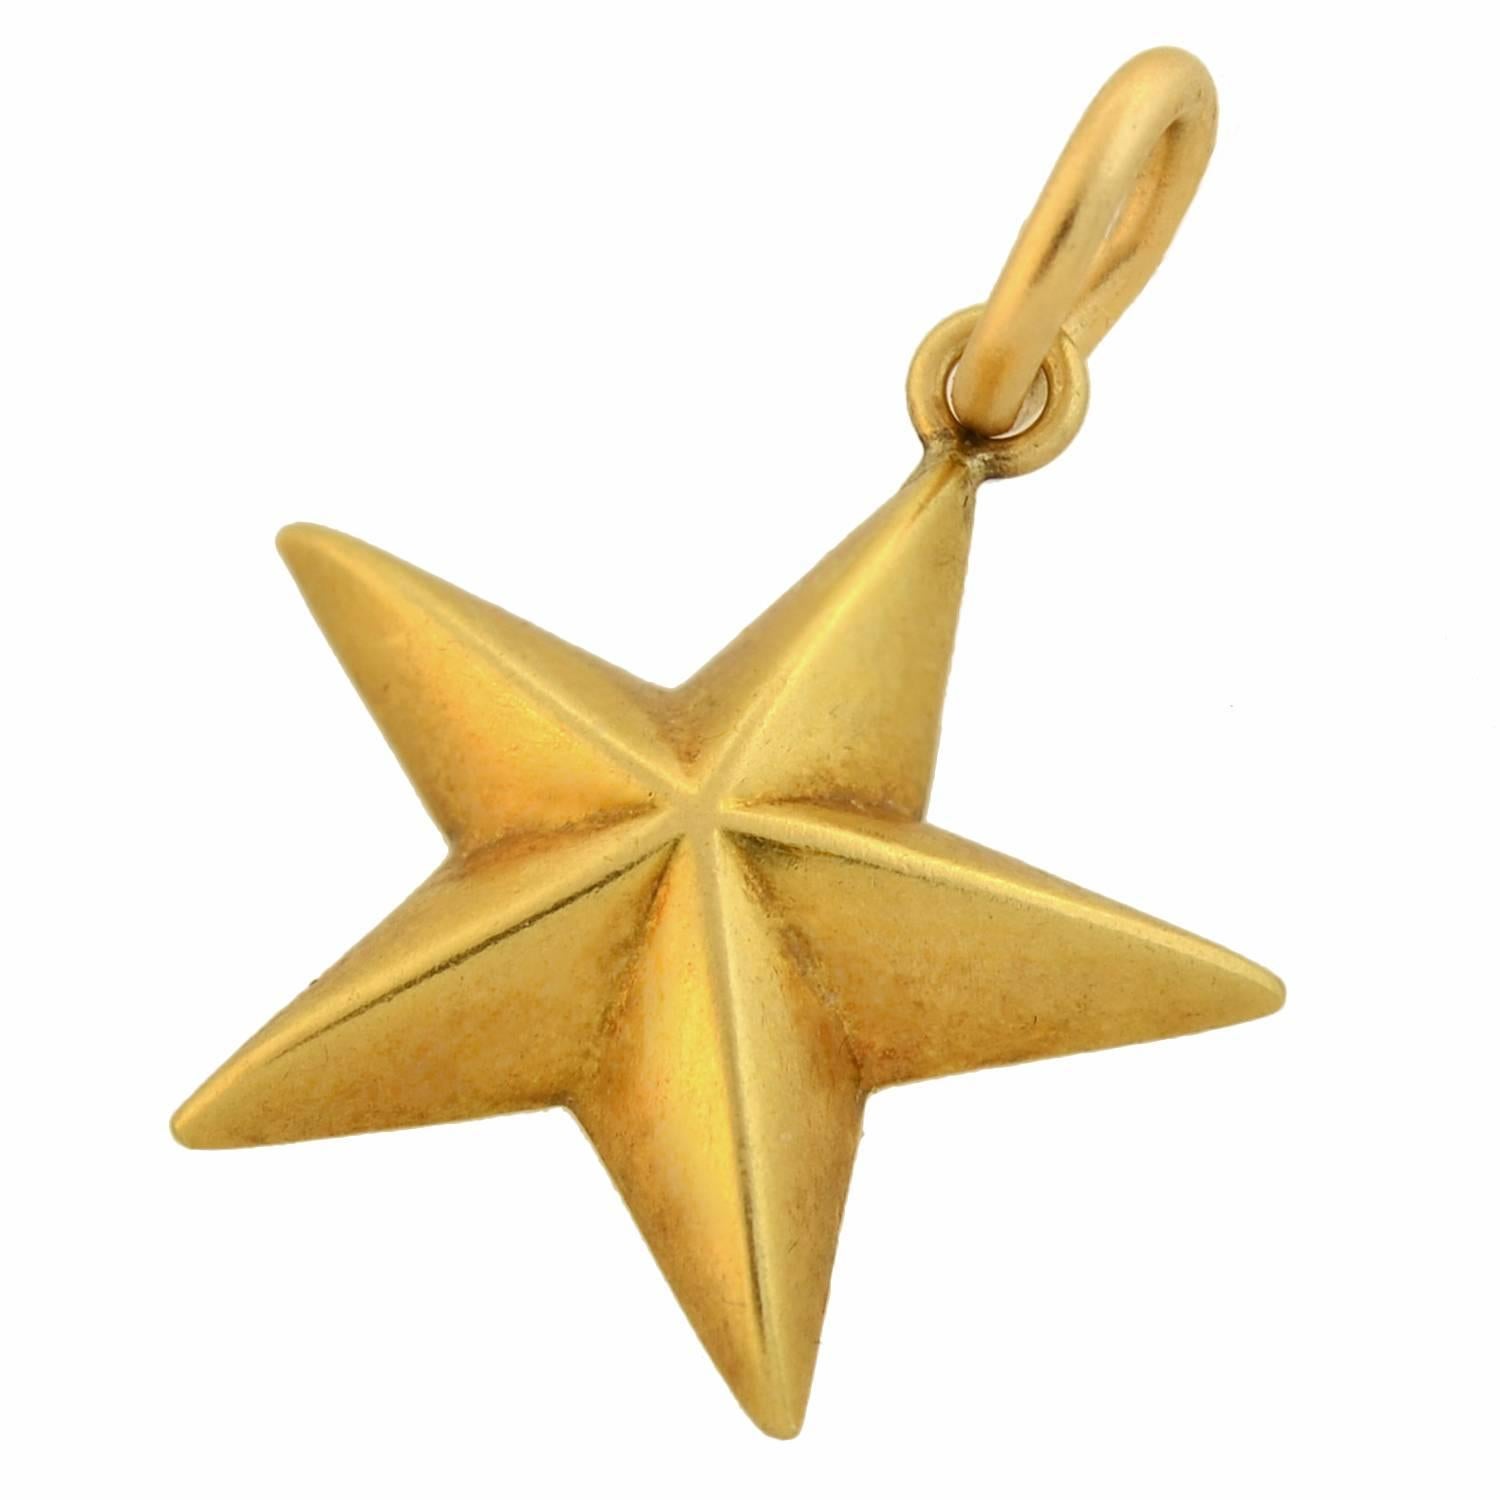 This 18kt gold star pendant by Tiffany & Co. is a stylish piece from the Art Deco era! The surface of the 5-point star has a 3-dimensional design, and is flat and smooth on the back. It hangs from a simple gold ring at the top, allowing it to hang